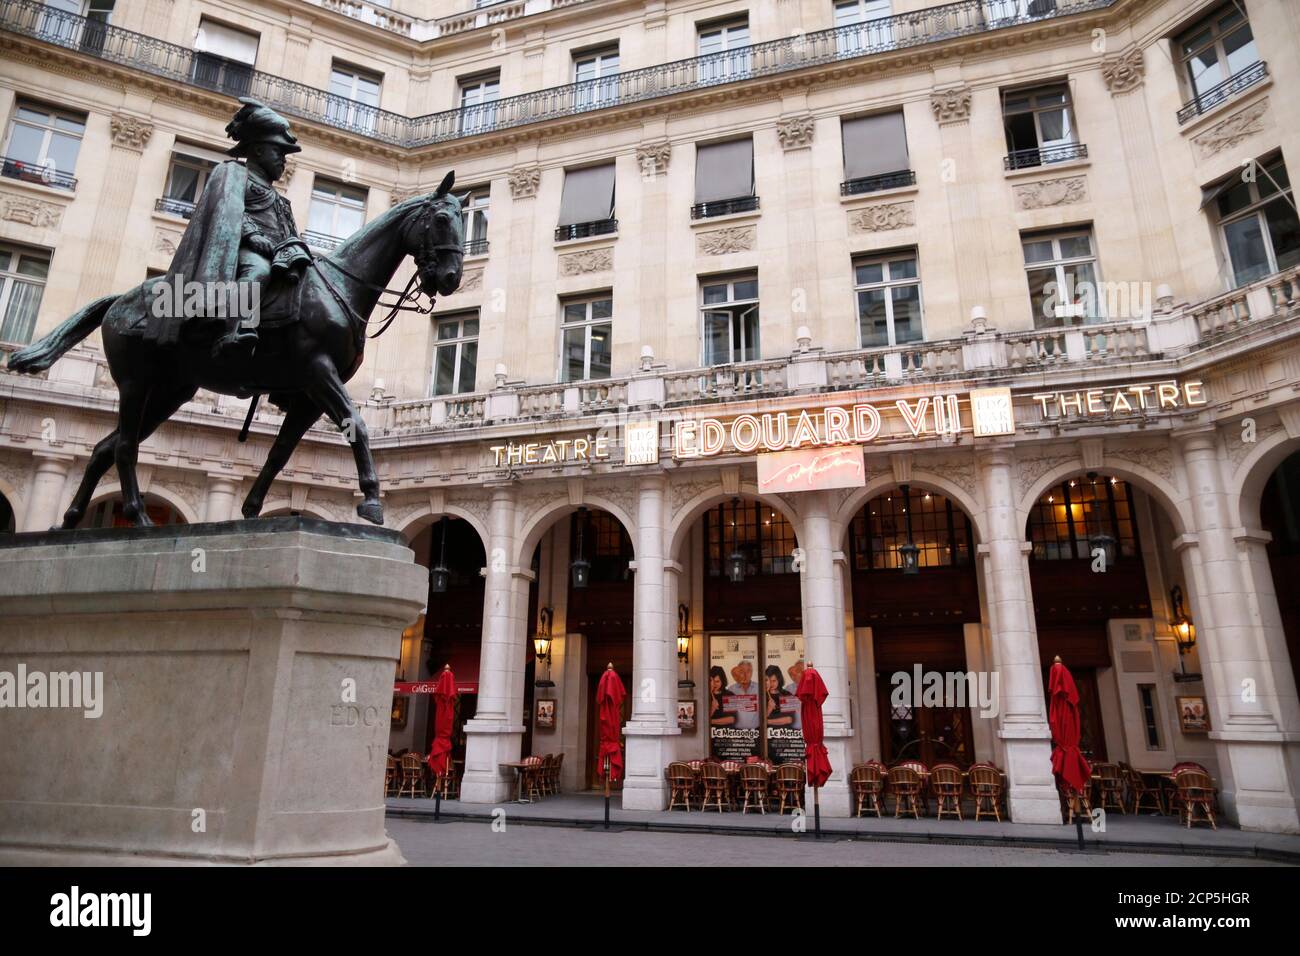 The edouard vii theatre hi-res stock photography and images - Alamy